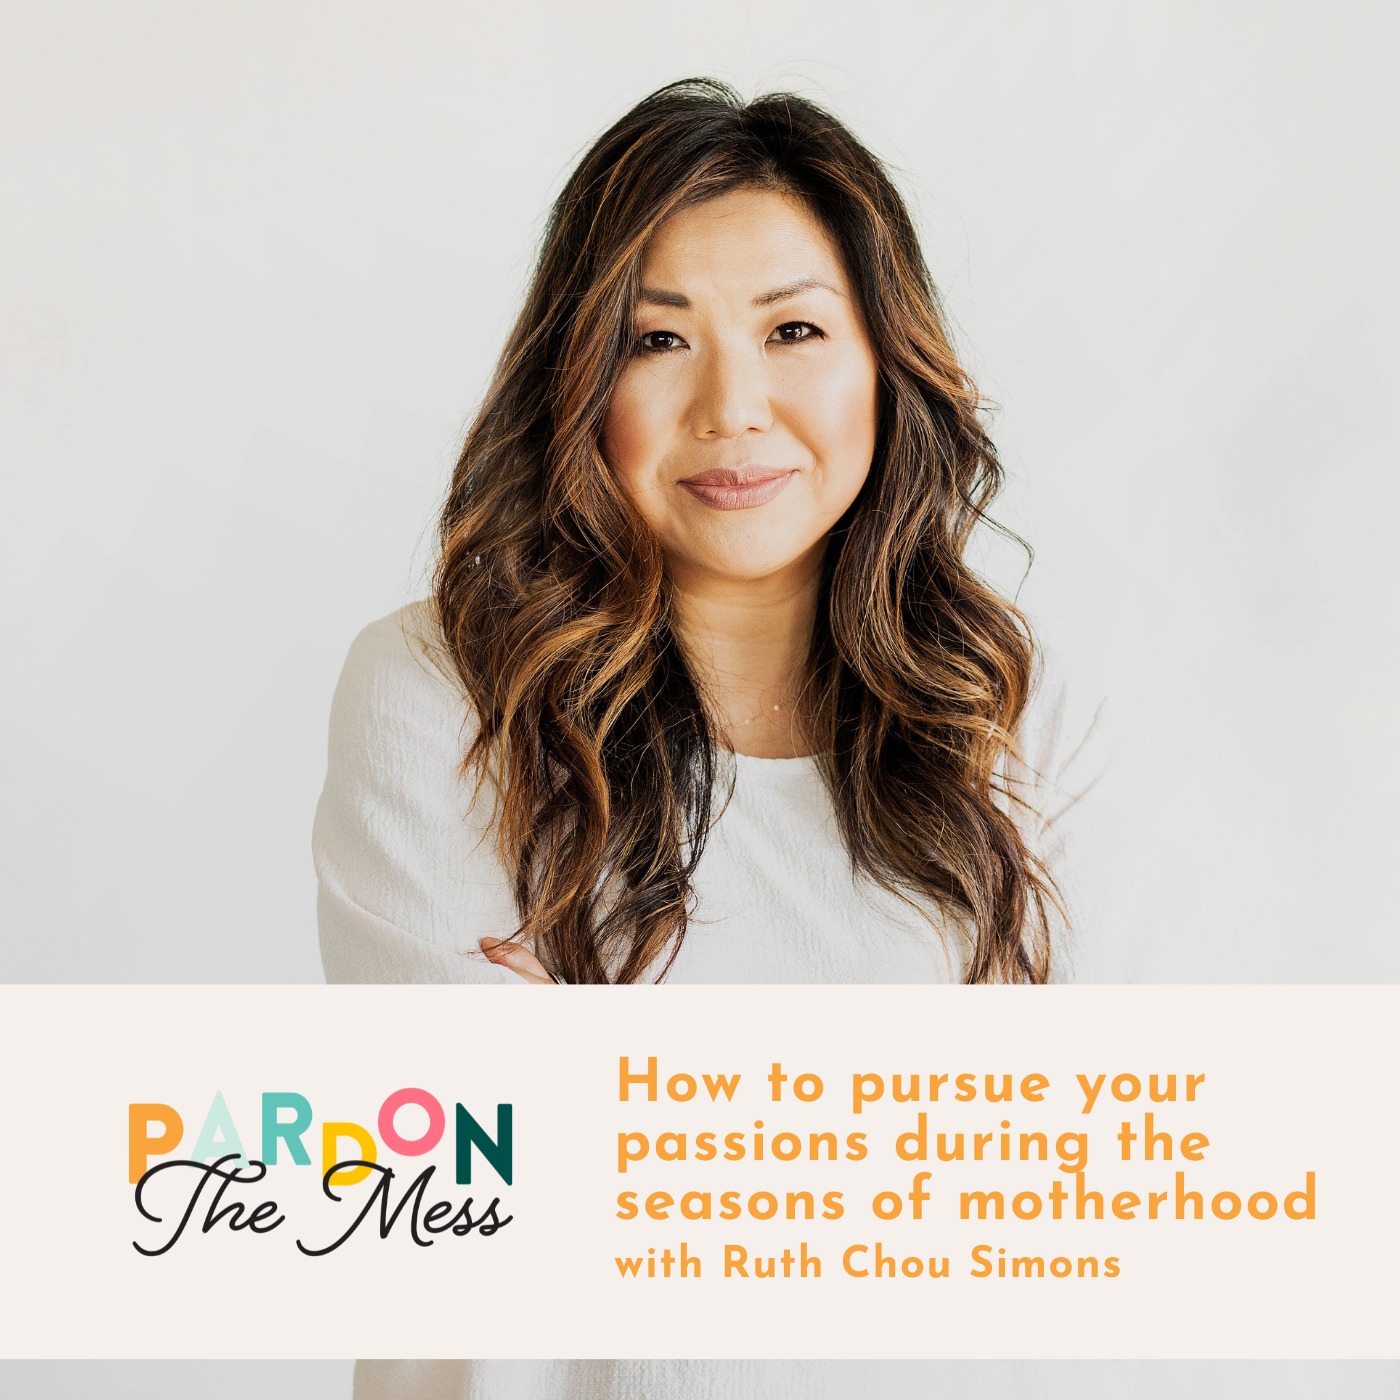 How to pursue your passions during the seasons of motherhood with Ruth Chou Simons